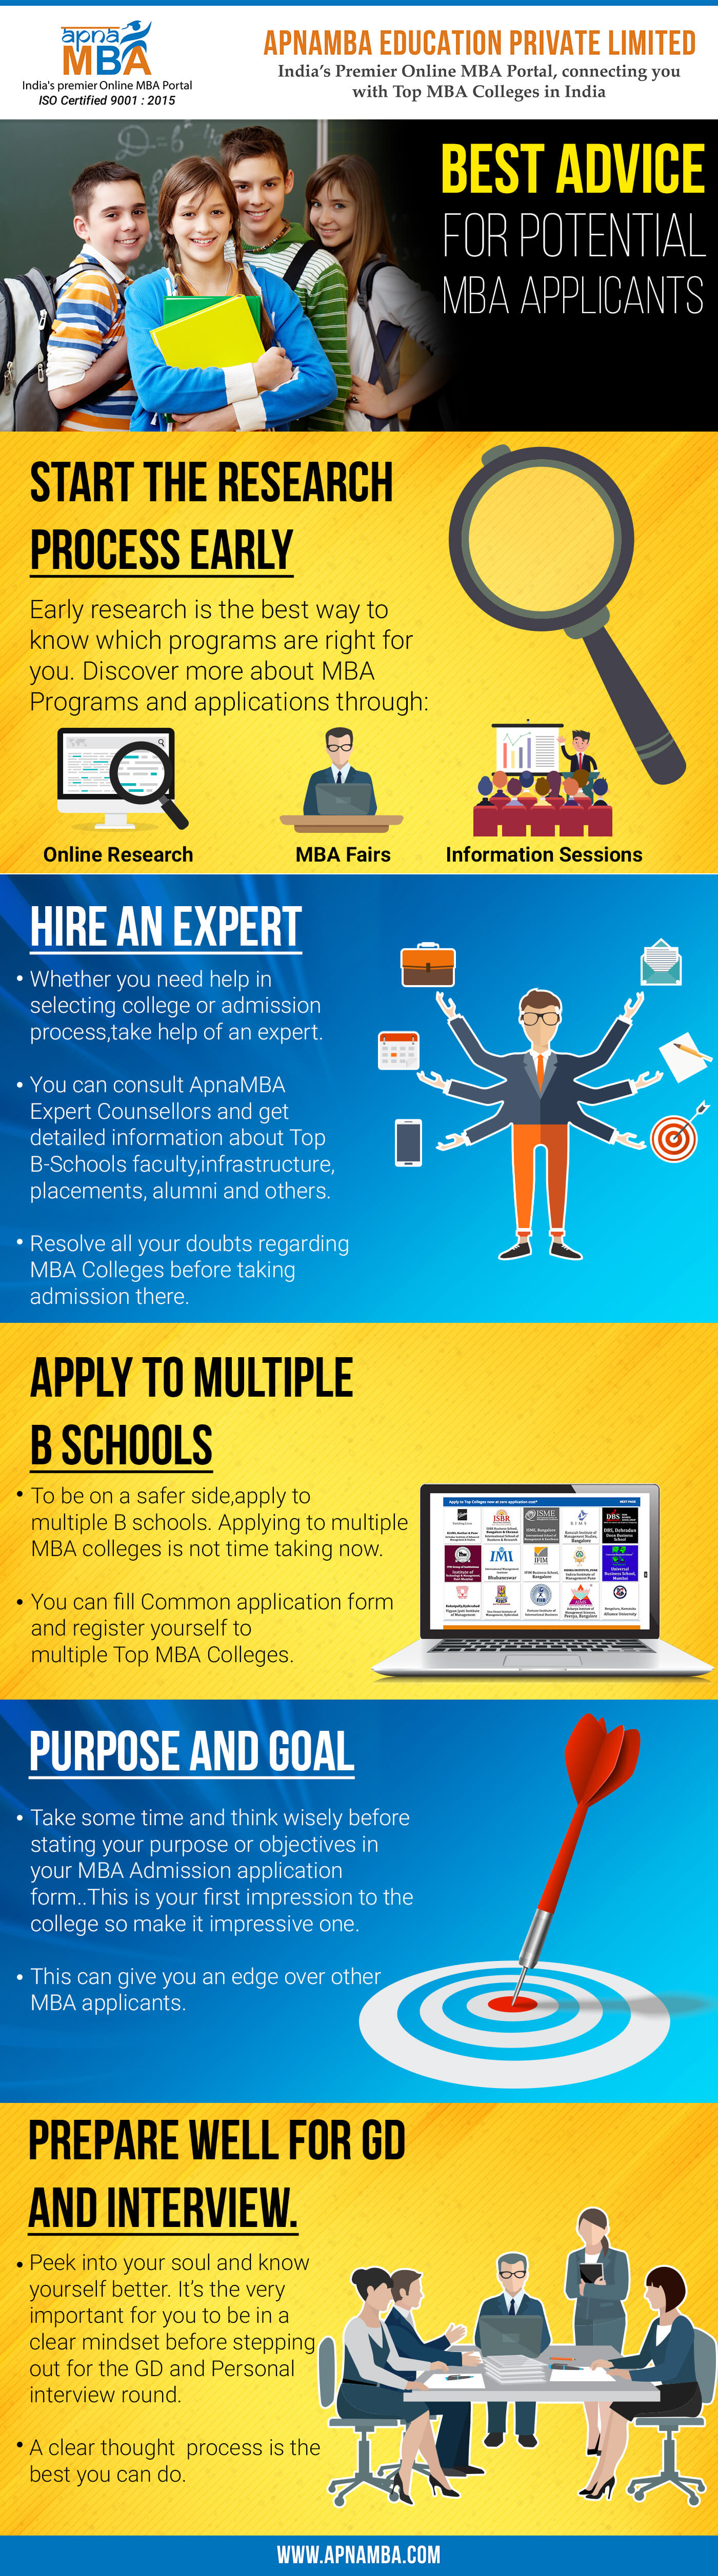 MBA Applicants | Potential MBA Applicants